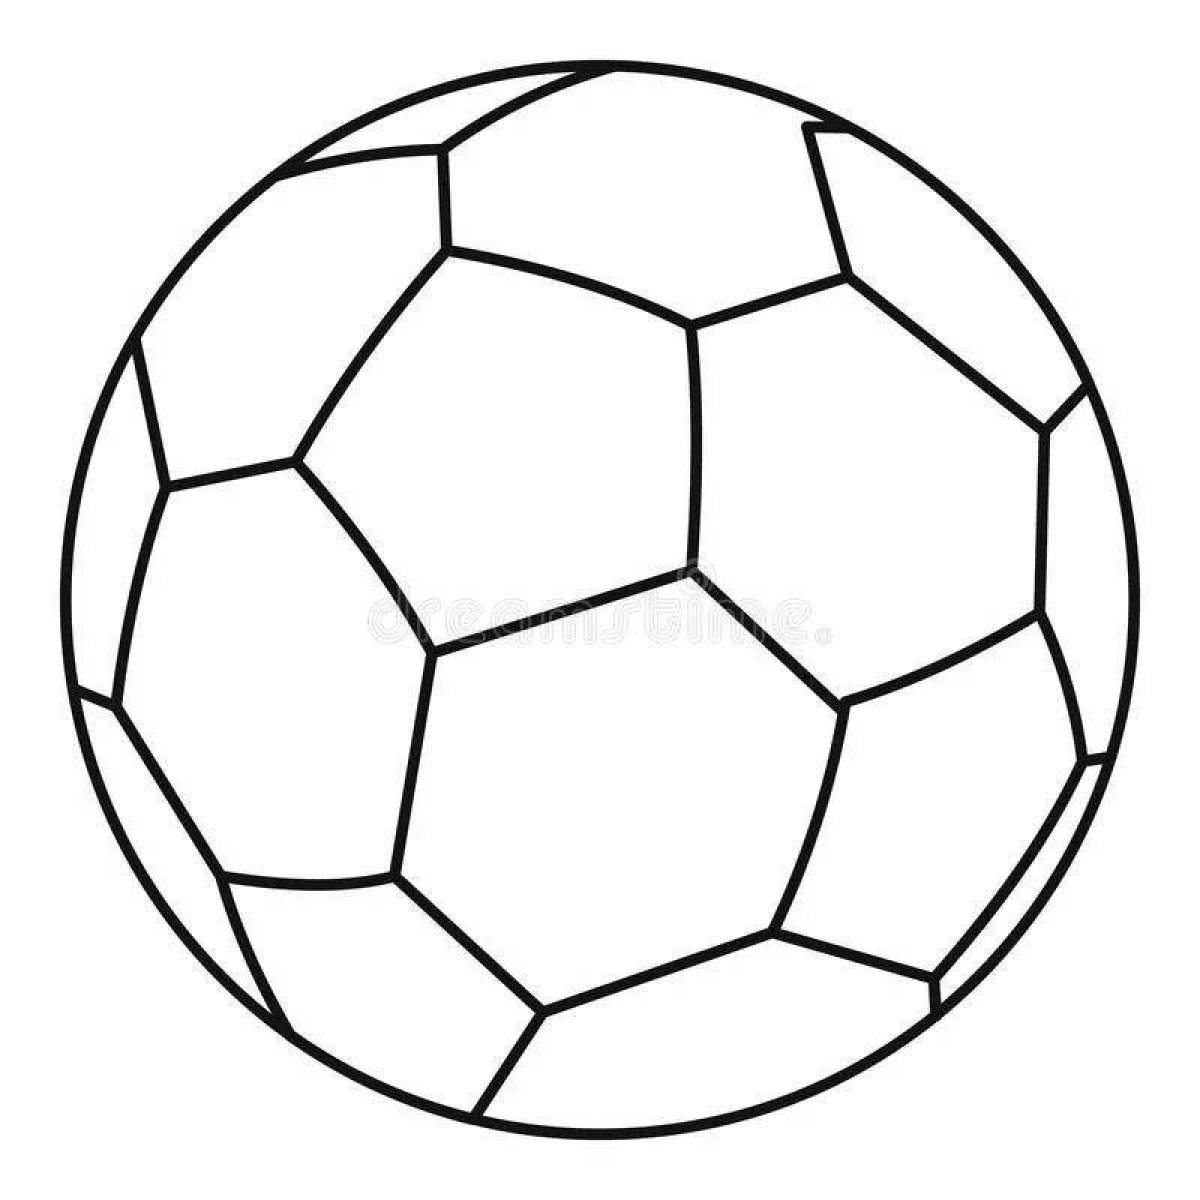 Funny soccer ball coloring for kids